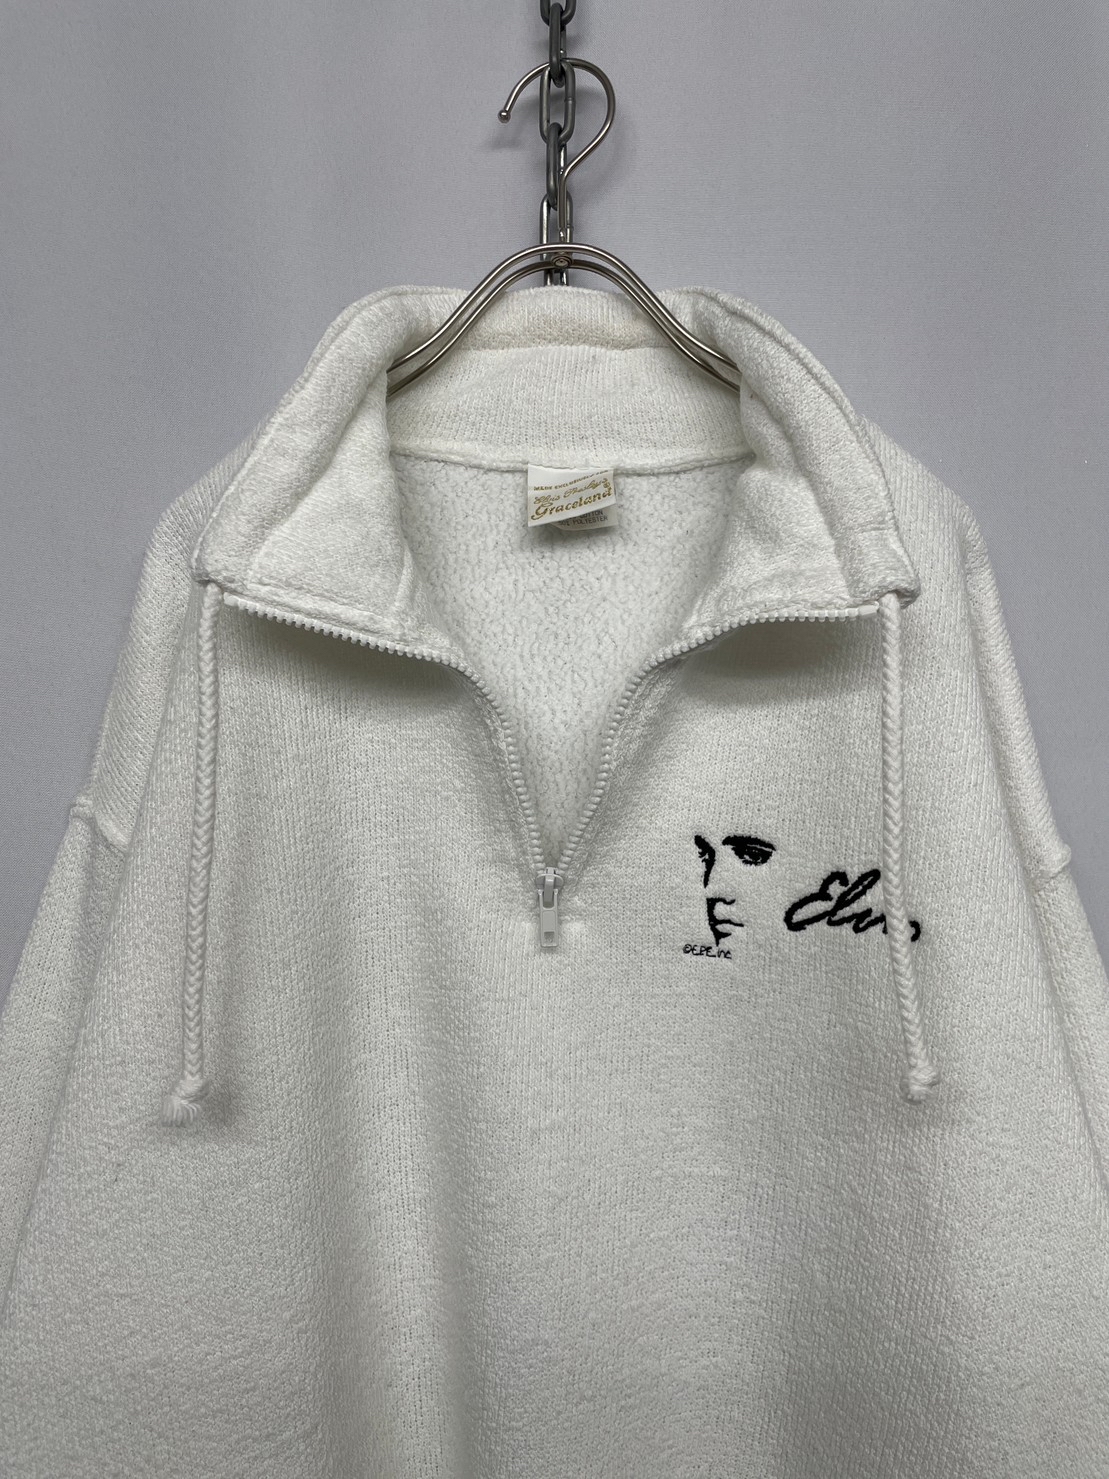 90’s “Elvis Presley” Sweat Made in USA